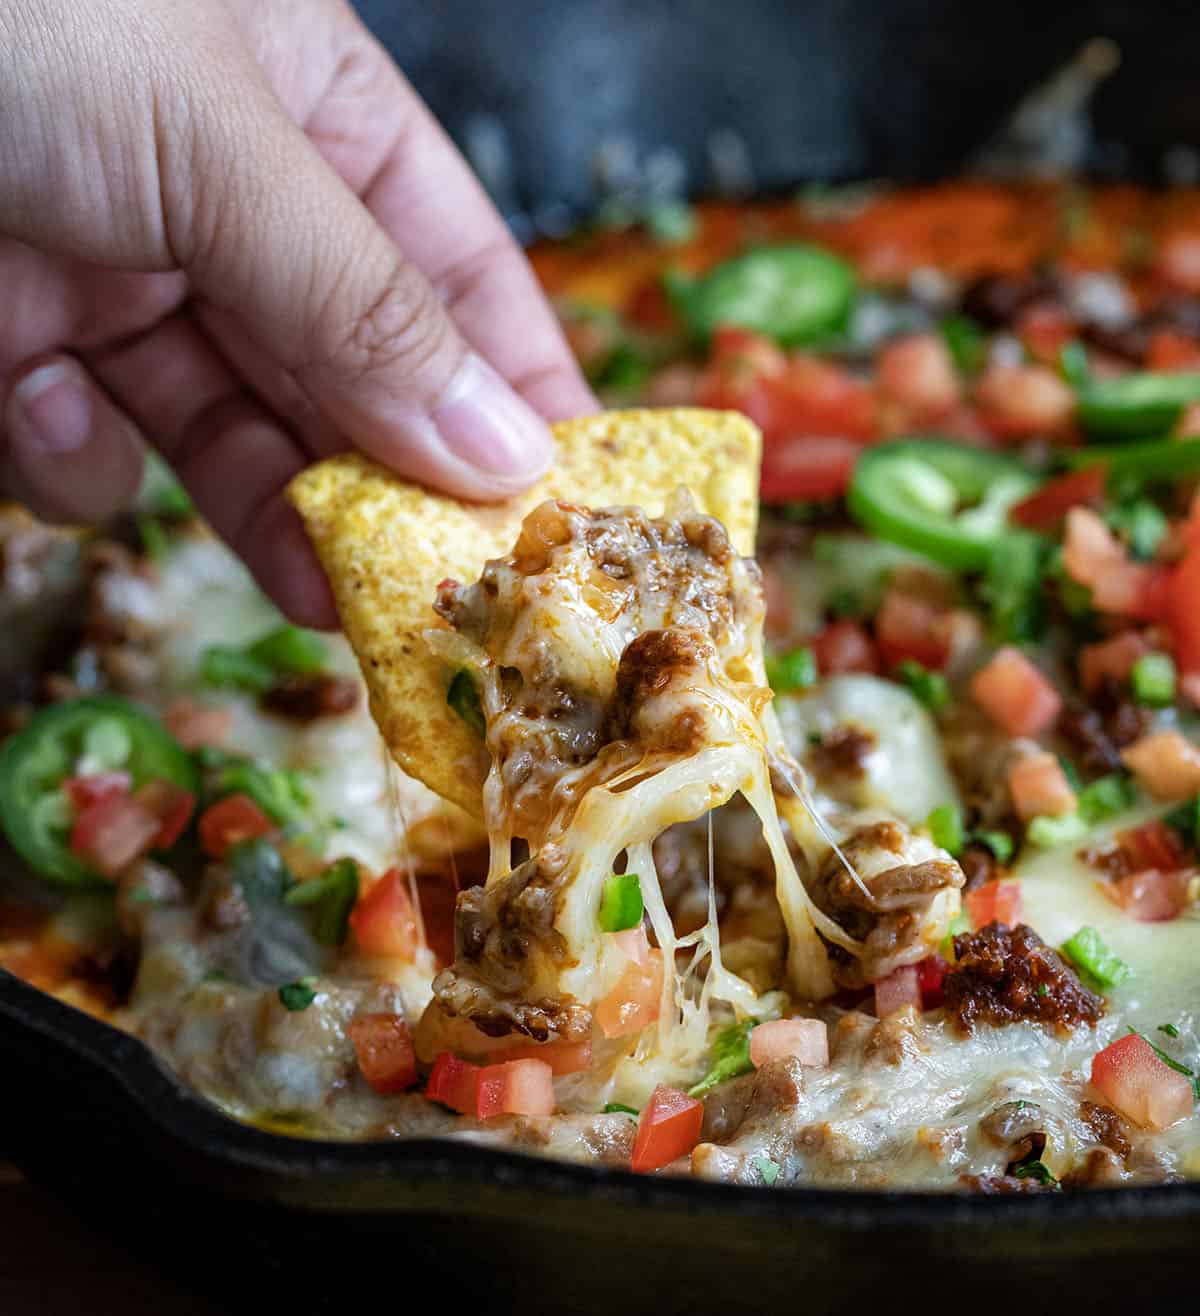 Hand dipping a chip into Queso Fundido.